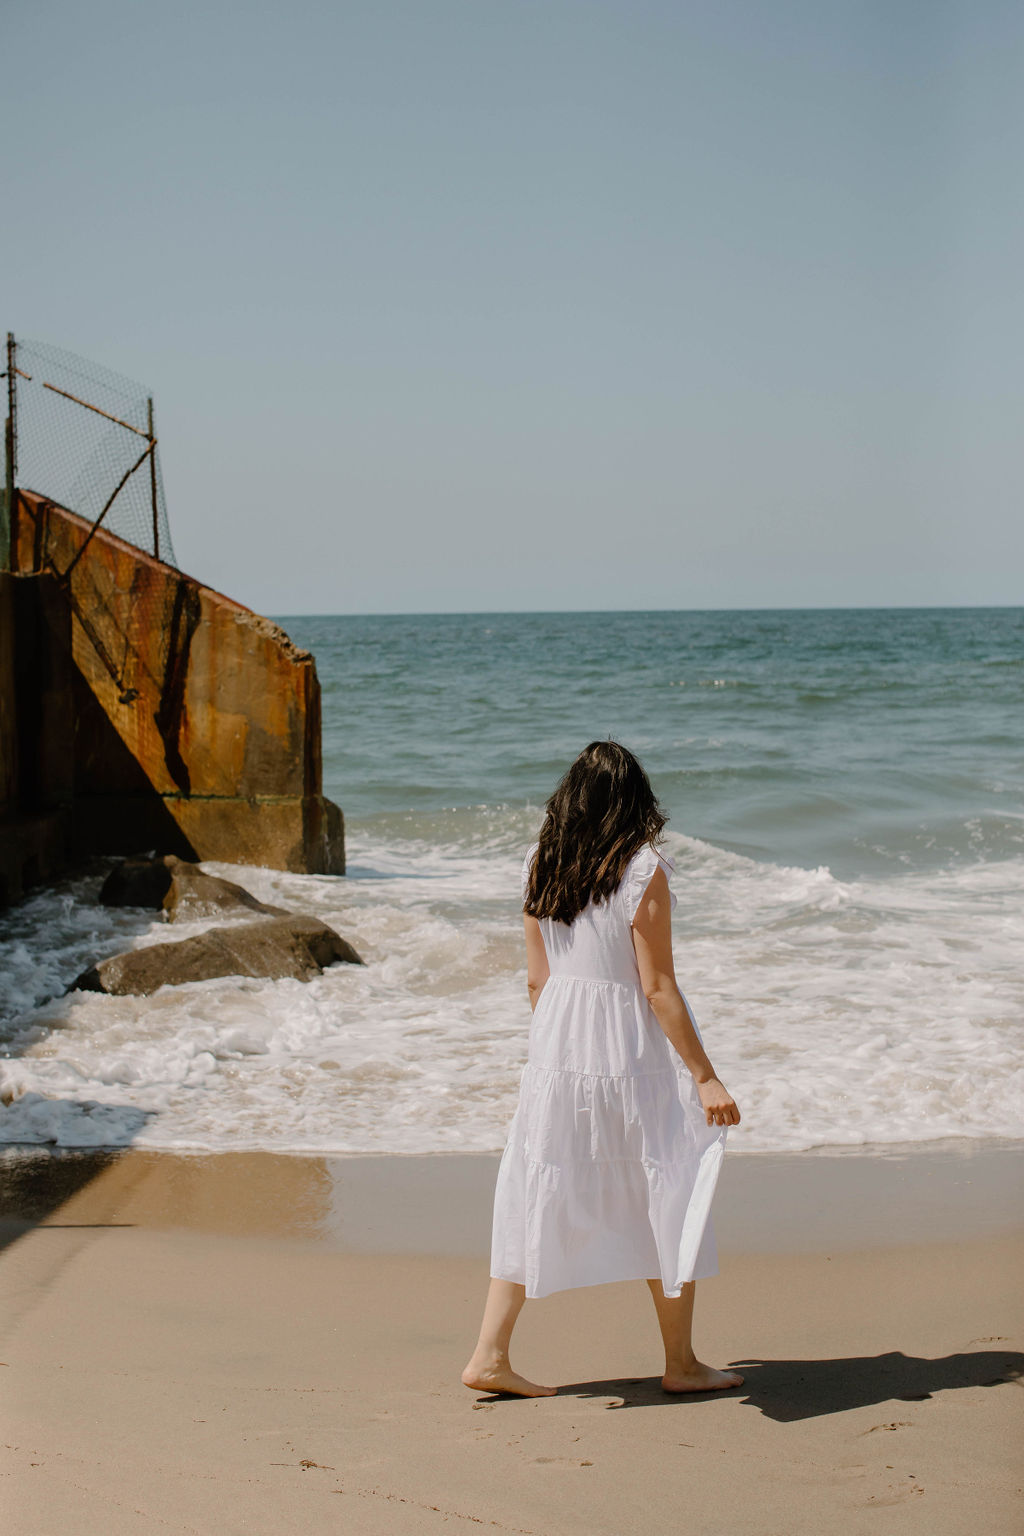 How to heal from traumas and grow as a person. Image is of a young woman facing the ocean.